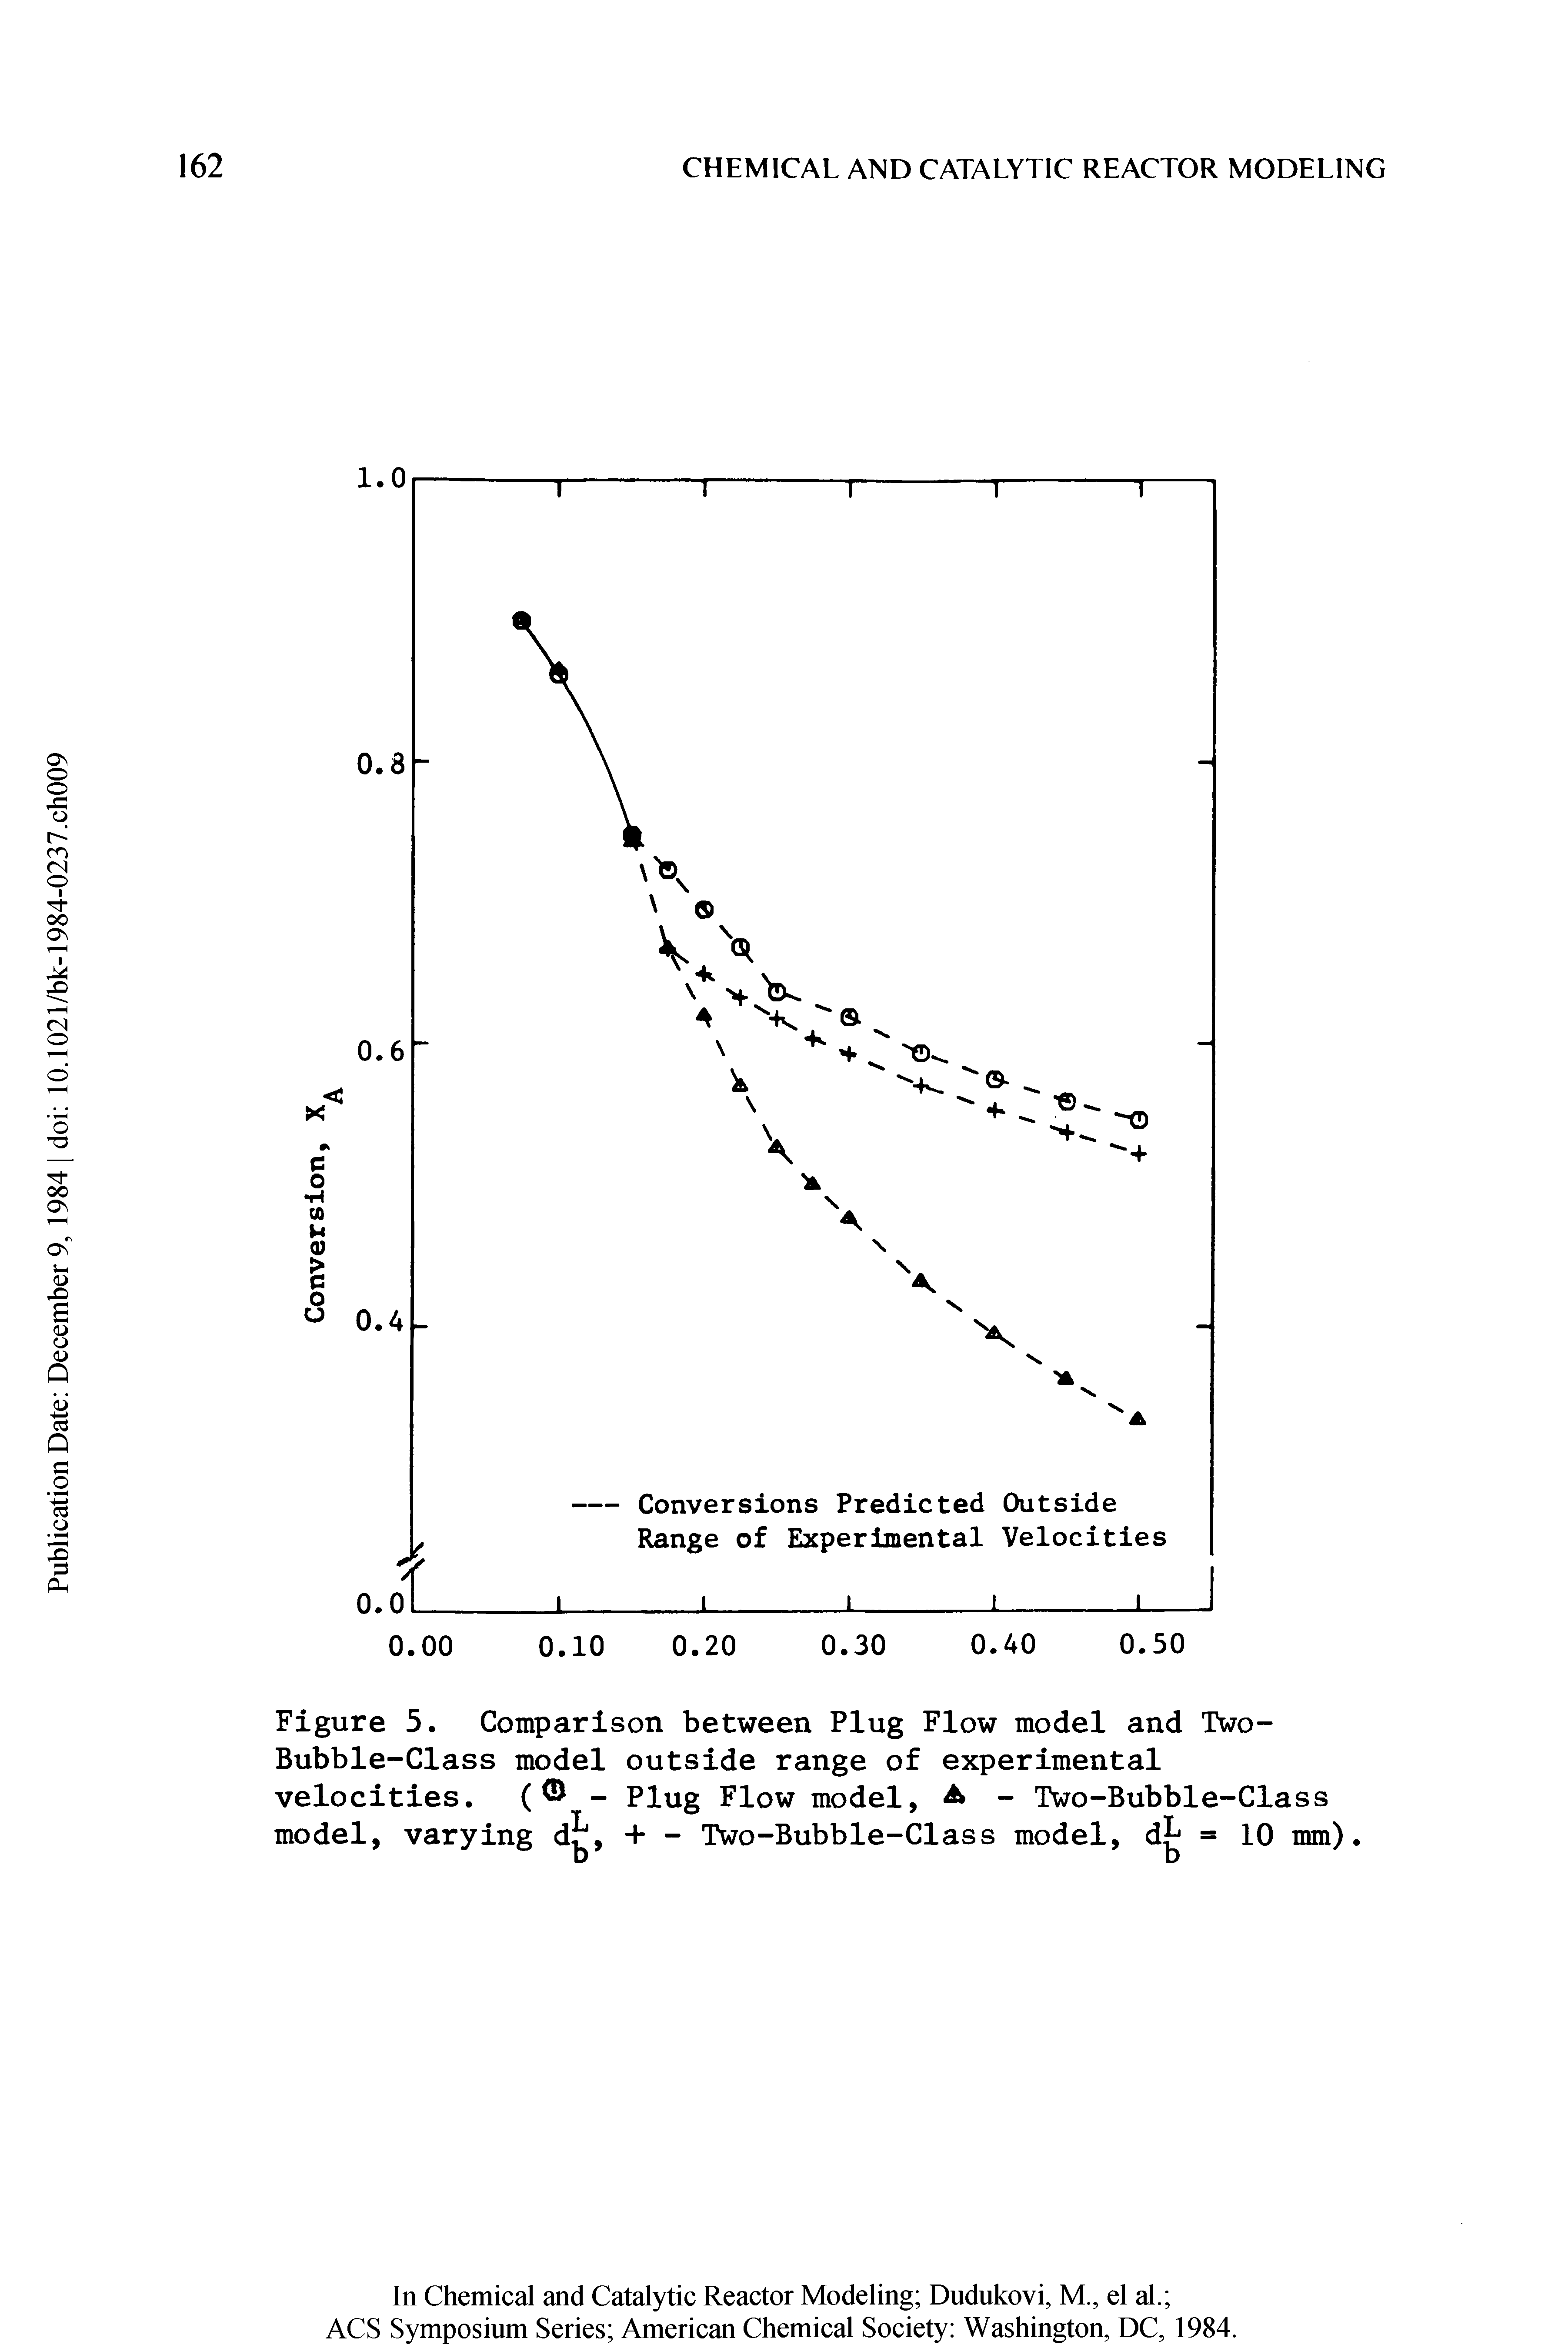 Figure 5. Comparison between Plug Flow model and Two-Bubble-Class model outside range of experimental velocities. ( - Plug Flow model, A - Two-Bubble-Class model, varying d , H— Two-Bubble-Class model, d = 10 mm).